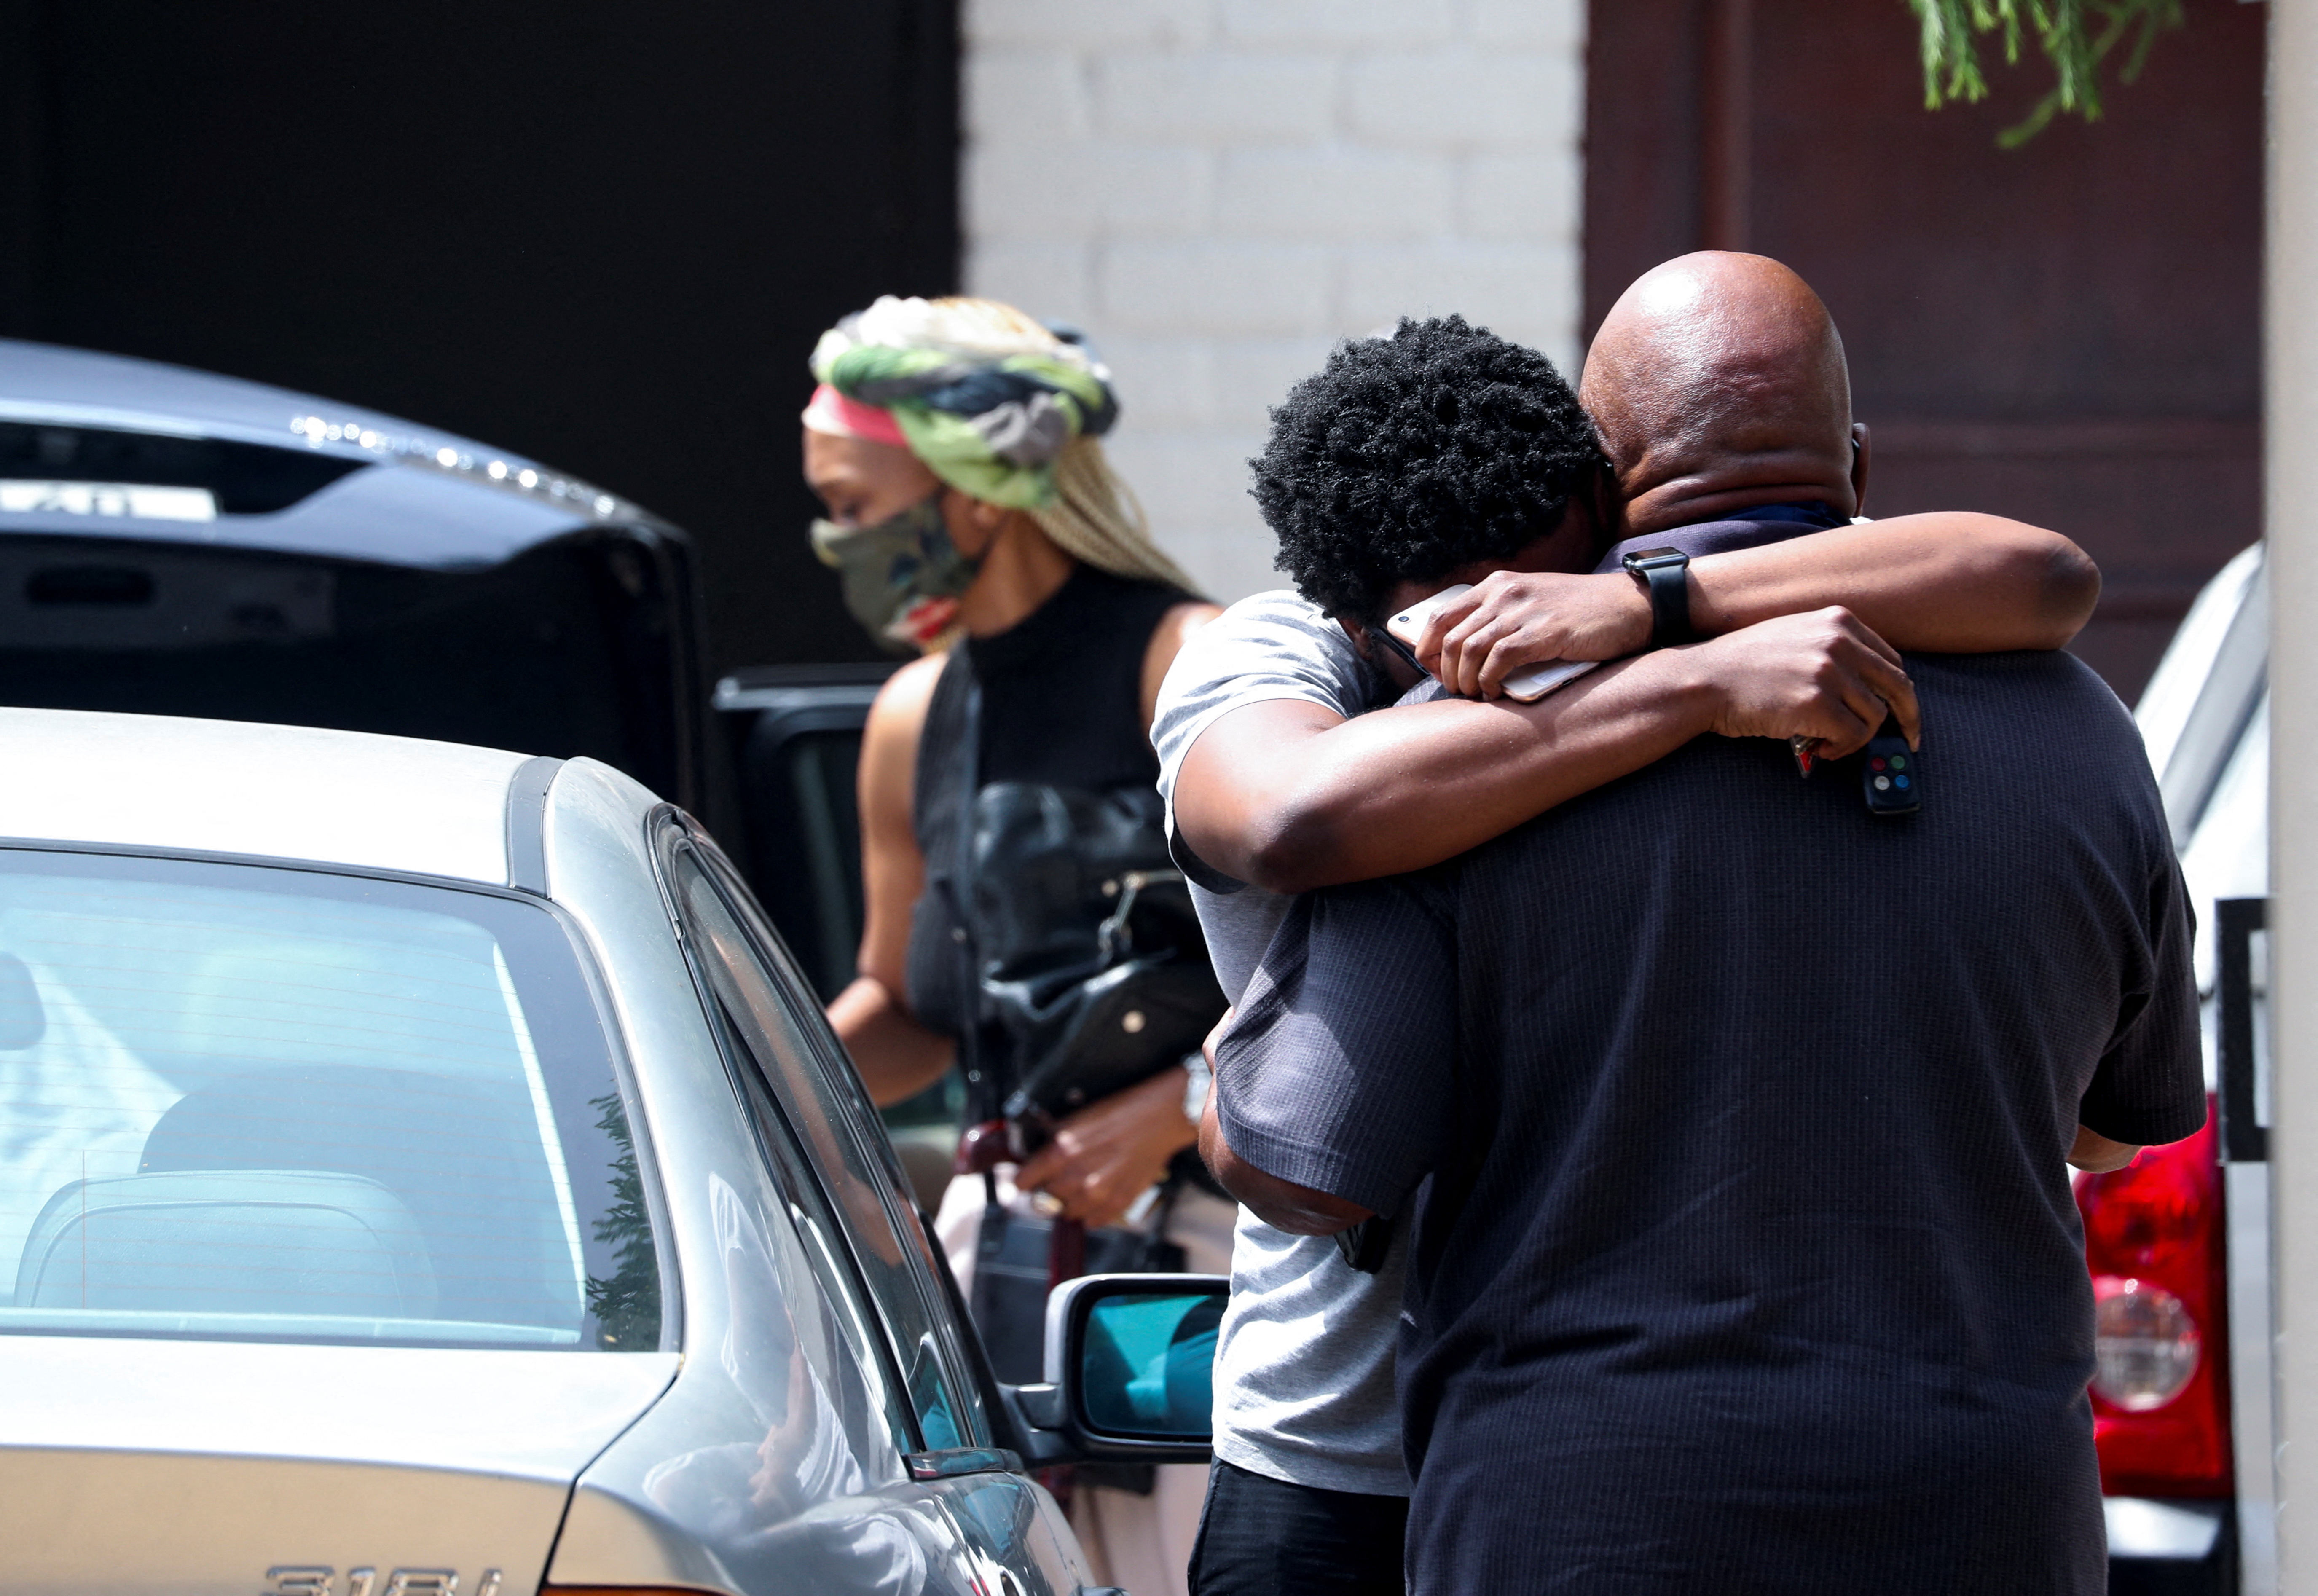 Friends and relatives of Archbishop Desmond Tutu console each other outside his home in Cape Town